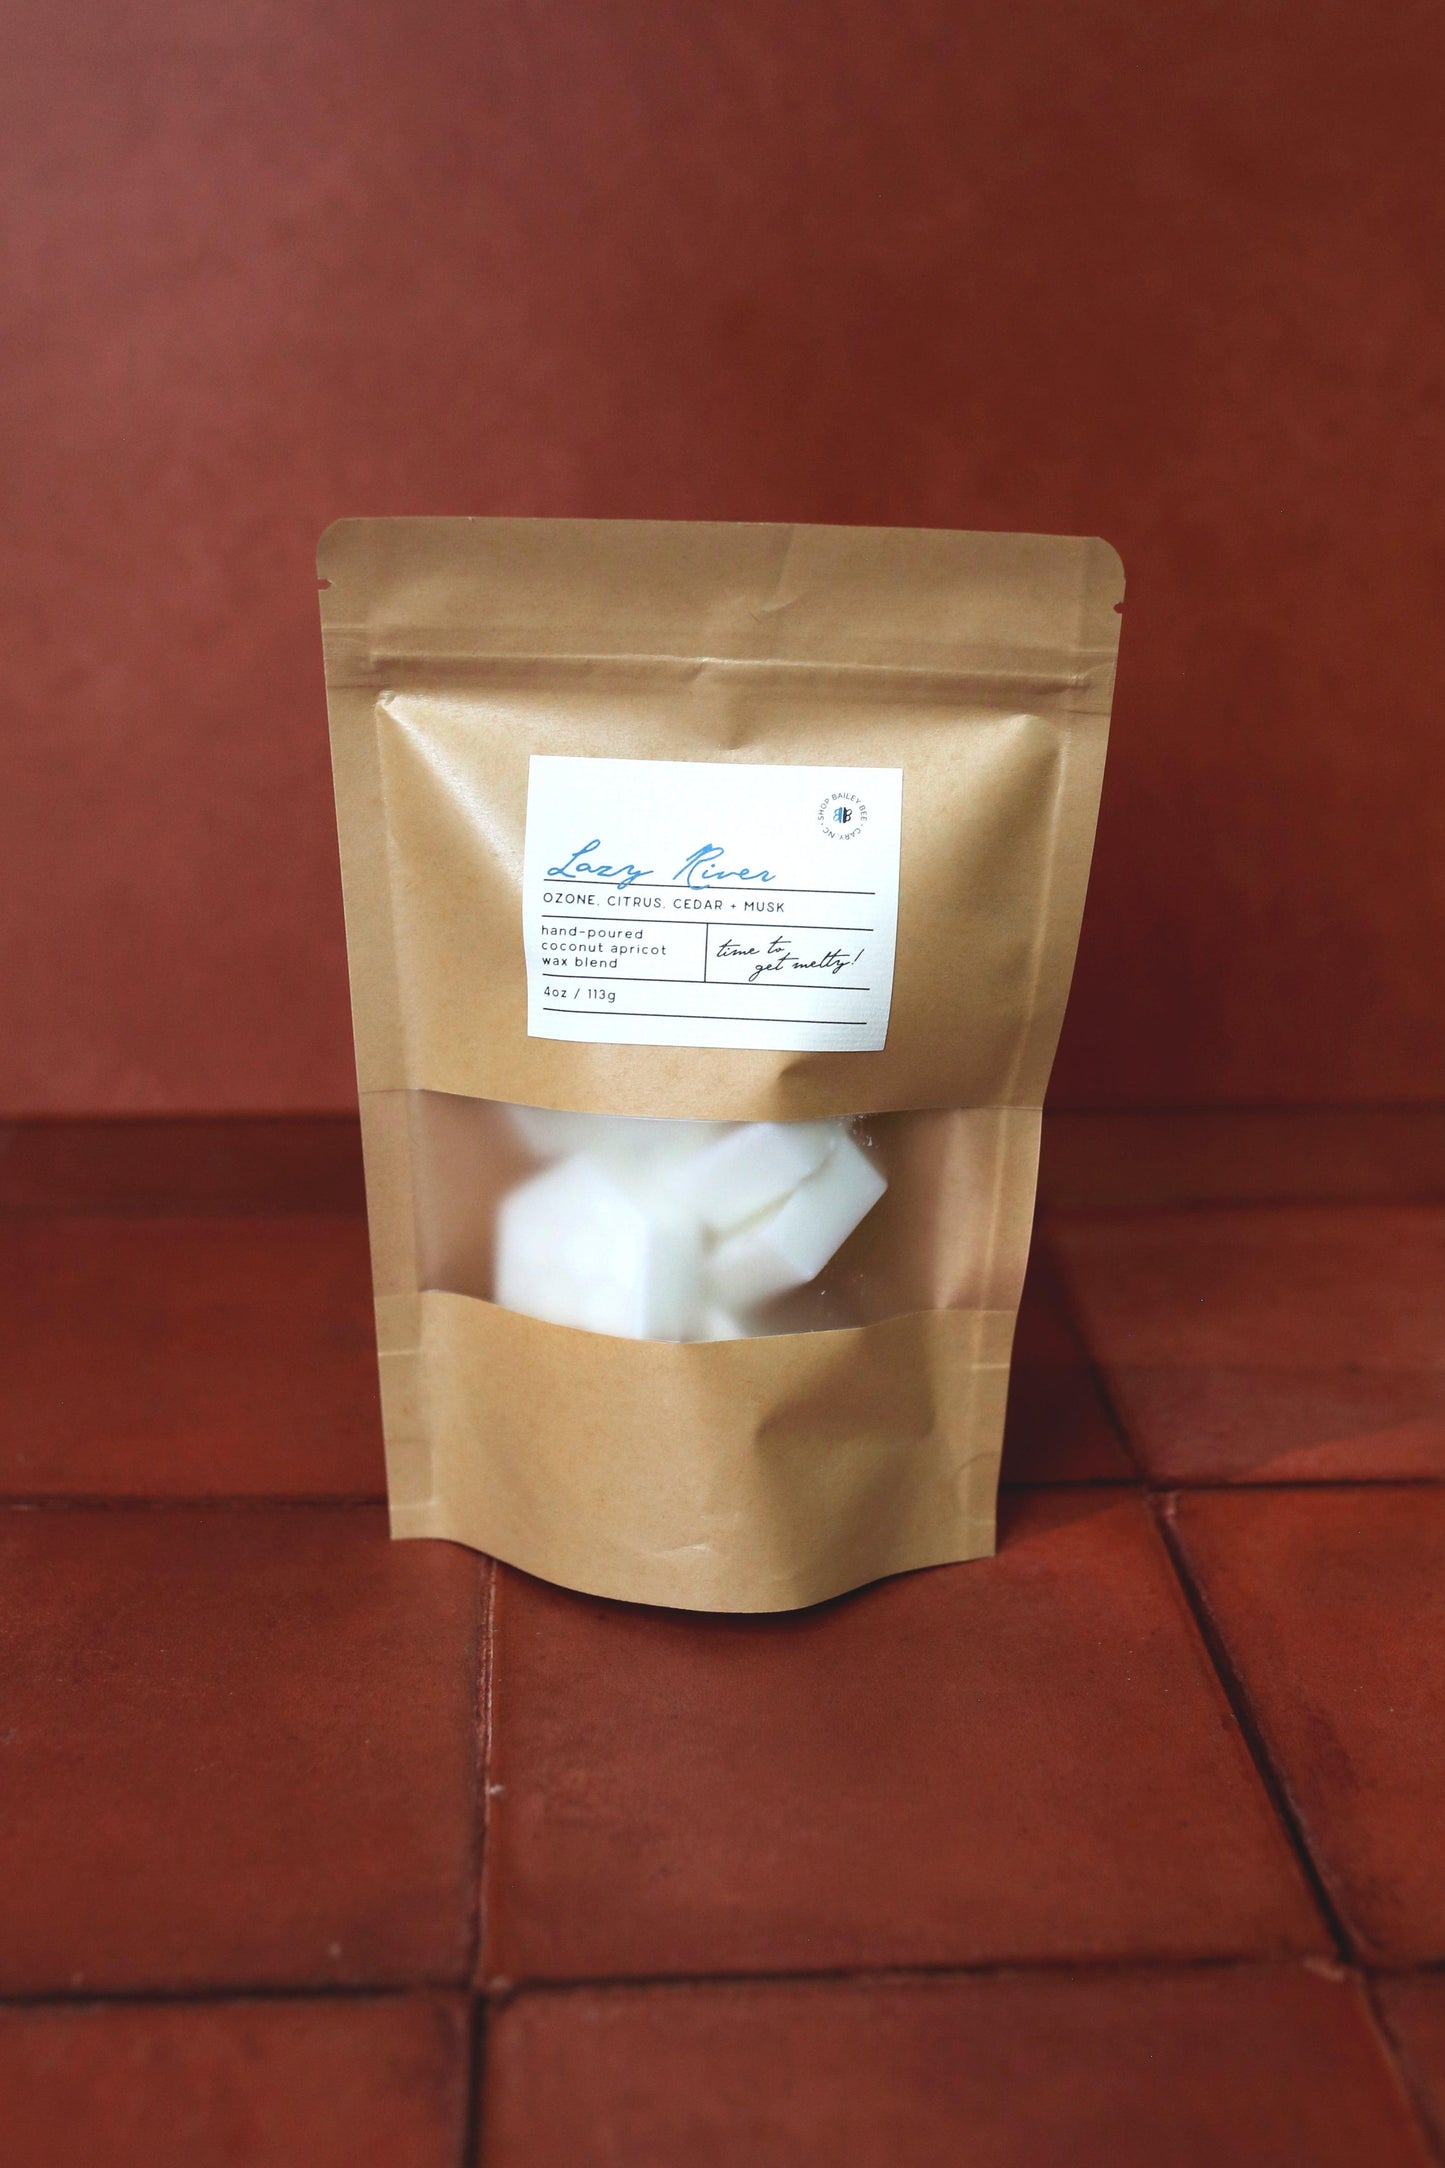  coconut wax melts in bag packaging